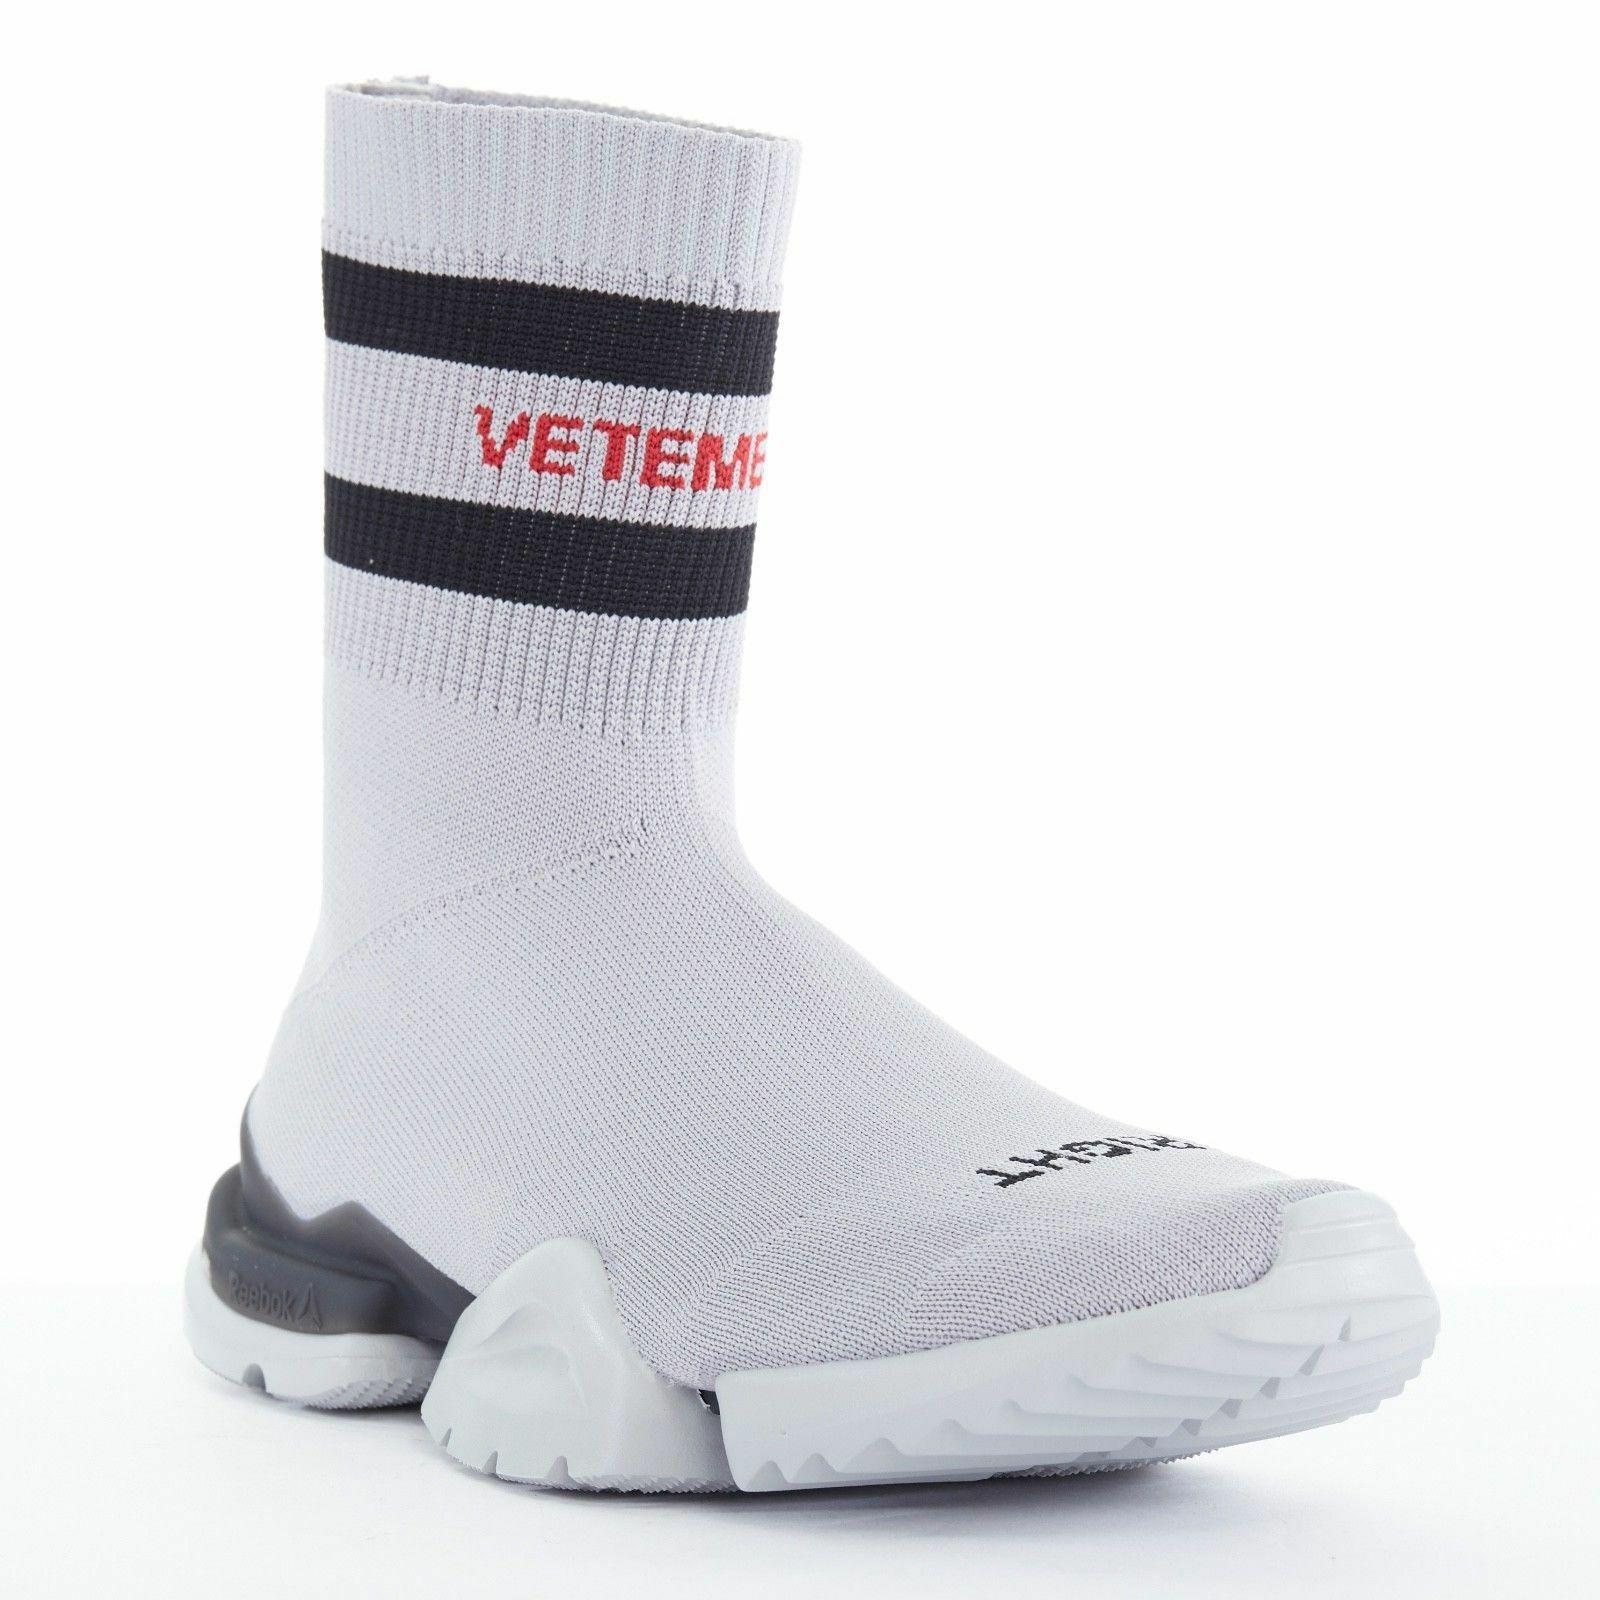 new VETEMENTS REEBOK Sock Runner grey sock knit speed trainer sneakers shoe EU42
VETEMENTS X REEBOK
Unisex Sock Runner from SS2018 collection
World-wide exclusive to Hong Kong Vetements pop up, extremely rare and limited colorway
Applying the